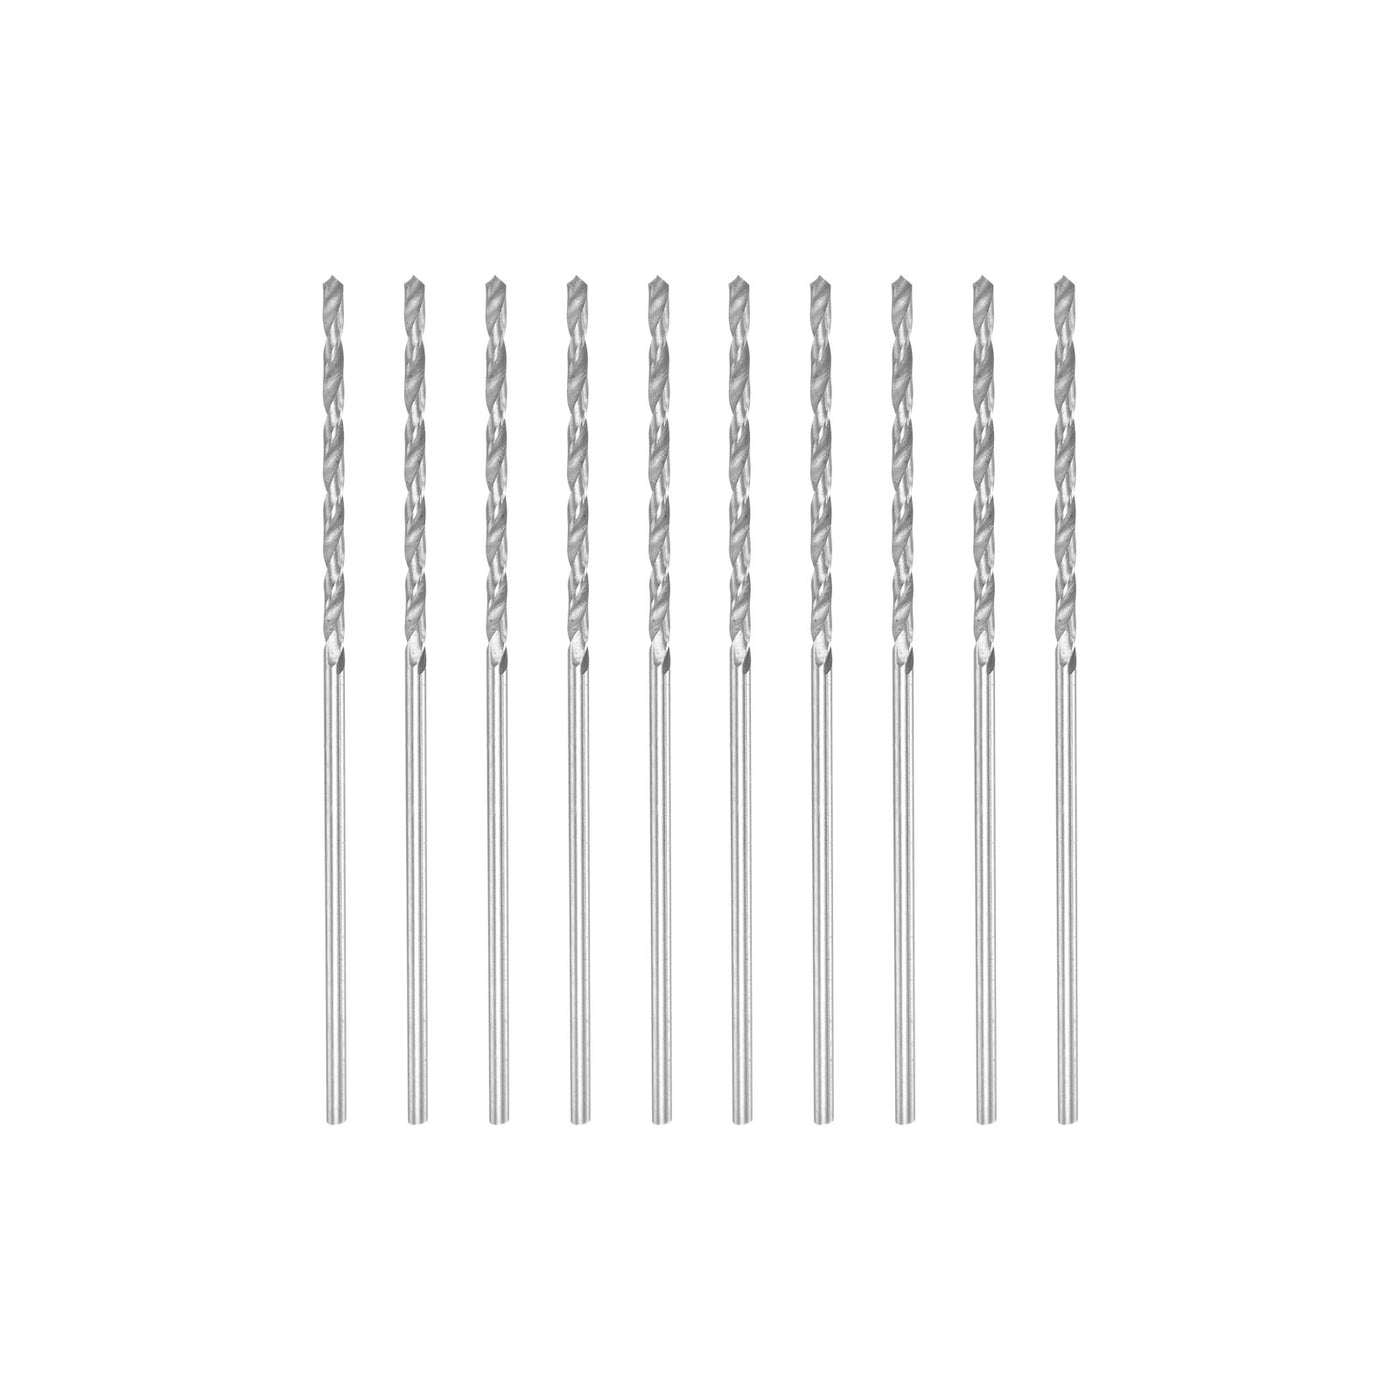 uxcell Uxcell 10 Pcs 1.05mm High Speed Steel Drill Bits, Fully Ground 42mm Length Drill Bit